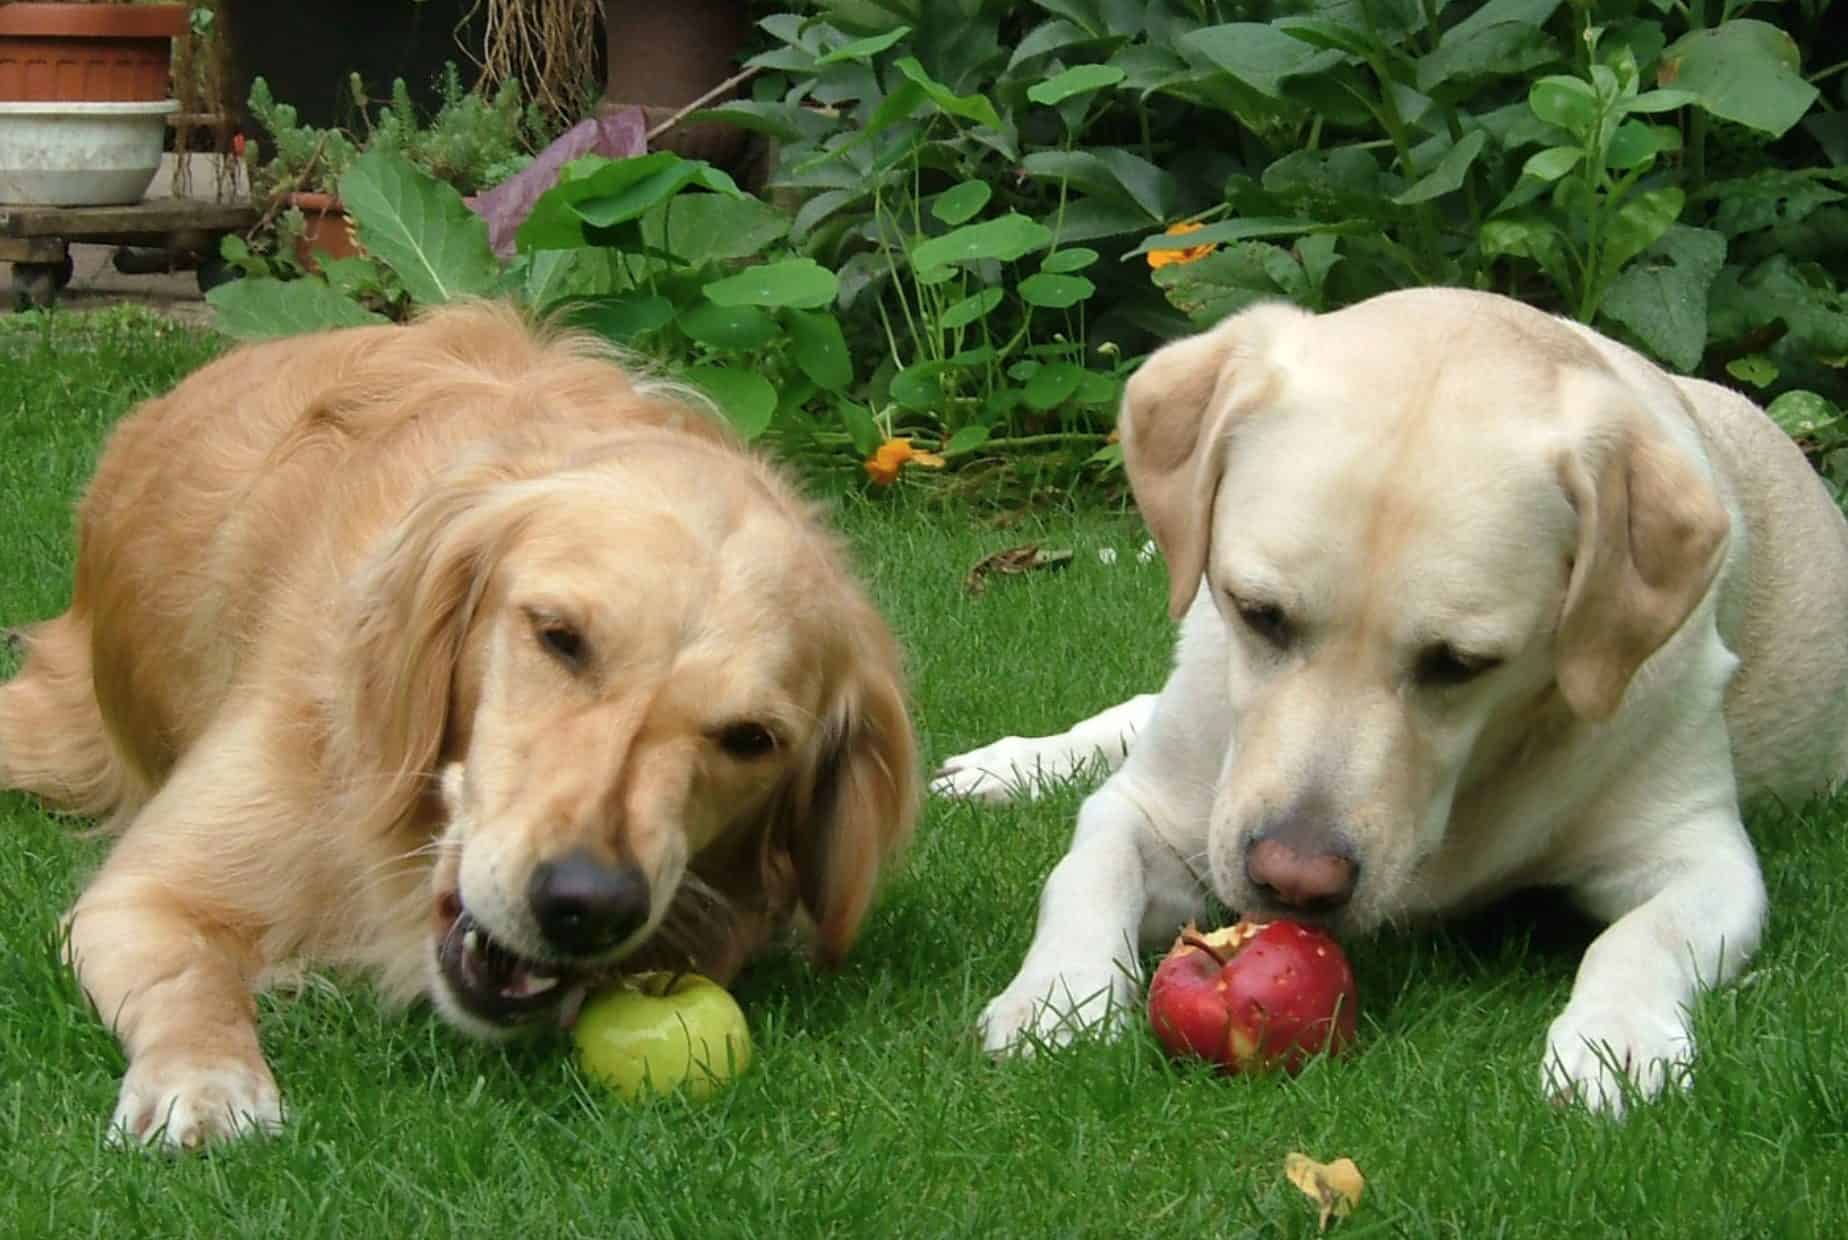 Can puppies eat apples?